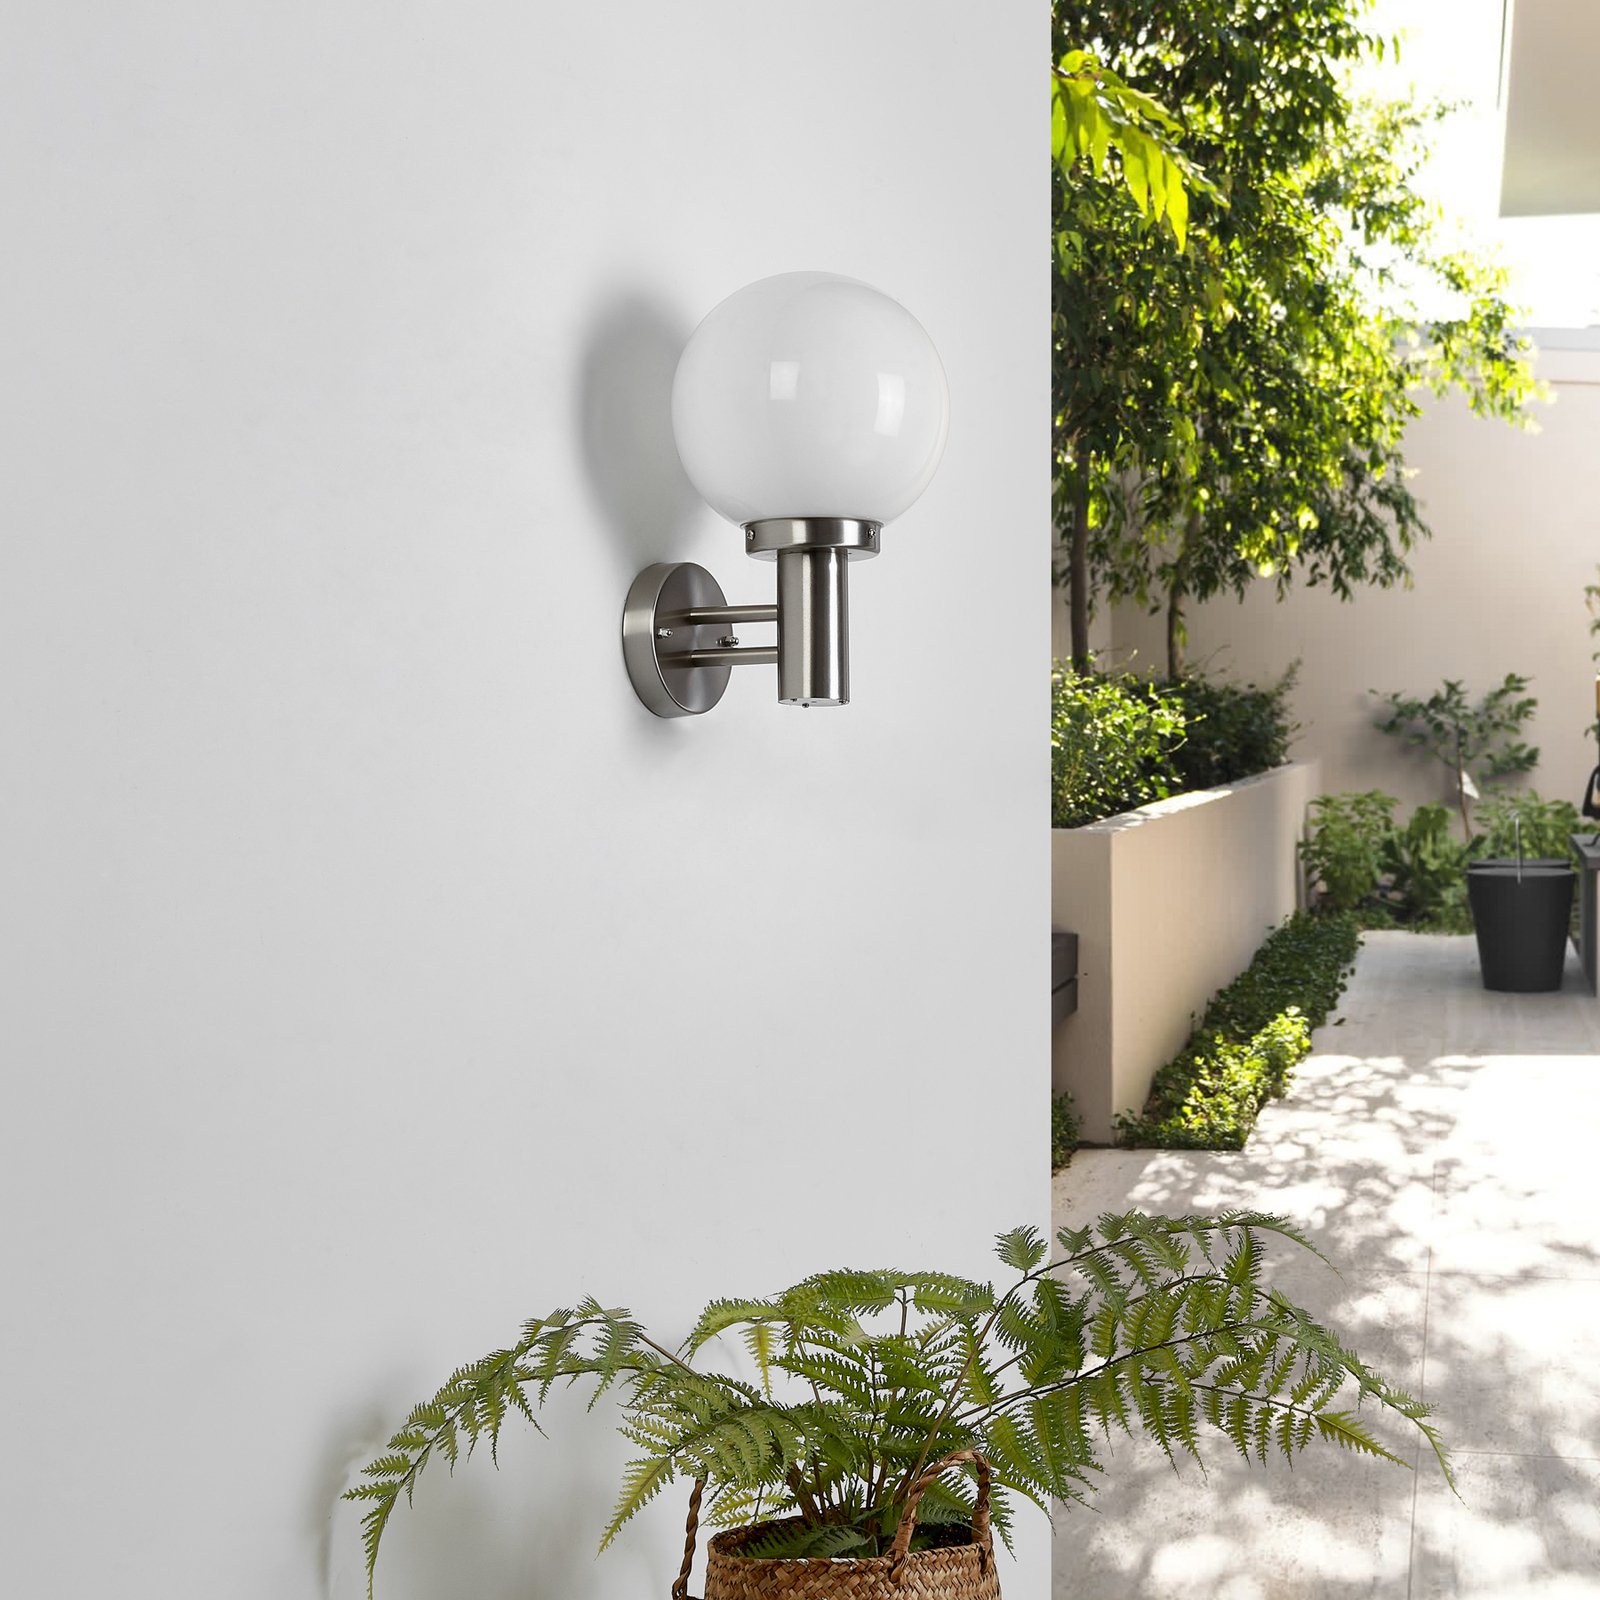 Stainless steel outdoor wall lamp Nada